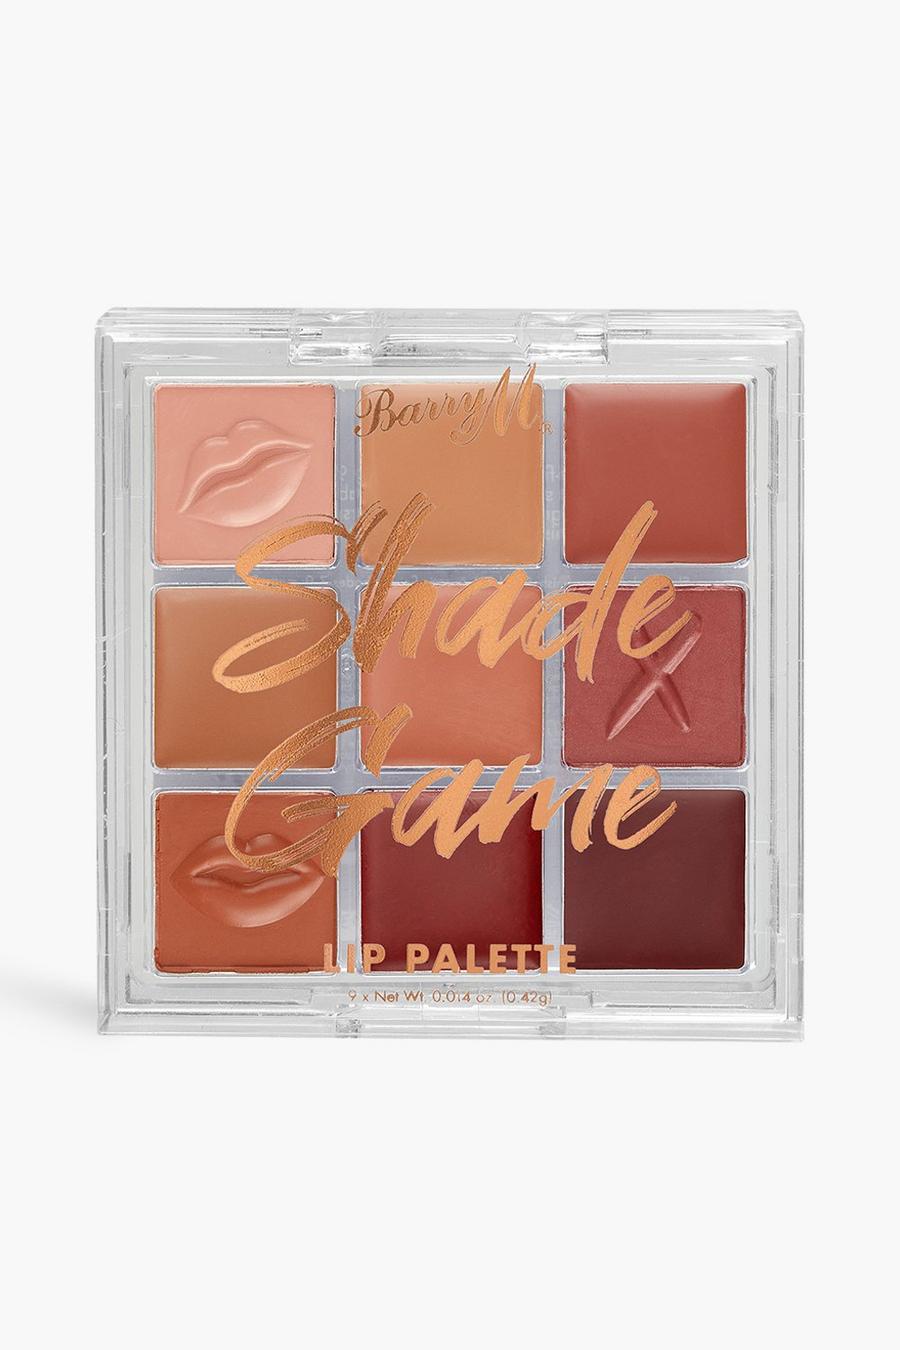 Barry M Shade Game Lippen-Palette, Multi image number 1